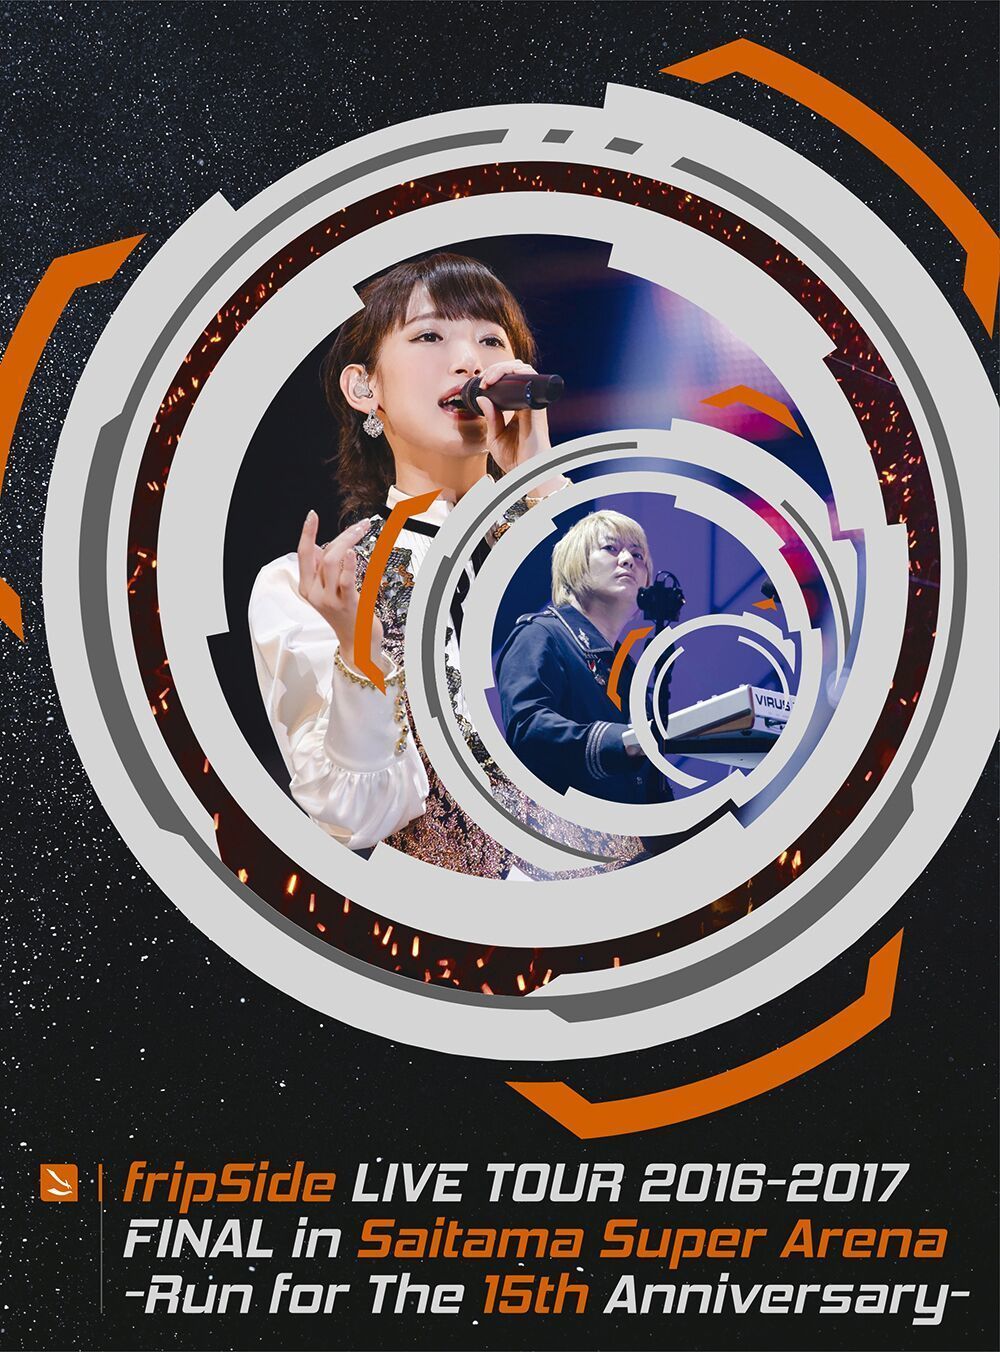 DISCOGRAPHY ／DVD/Blu-ray | fripSide OFFICIAL SITE